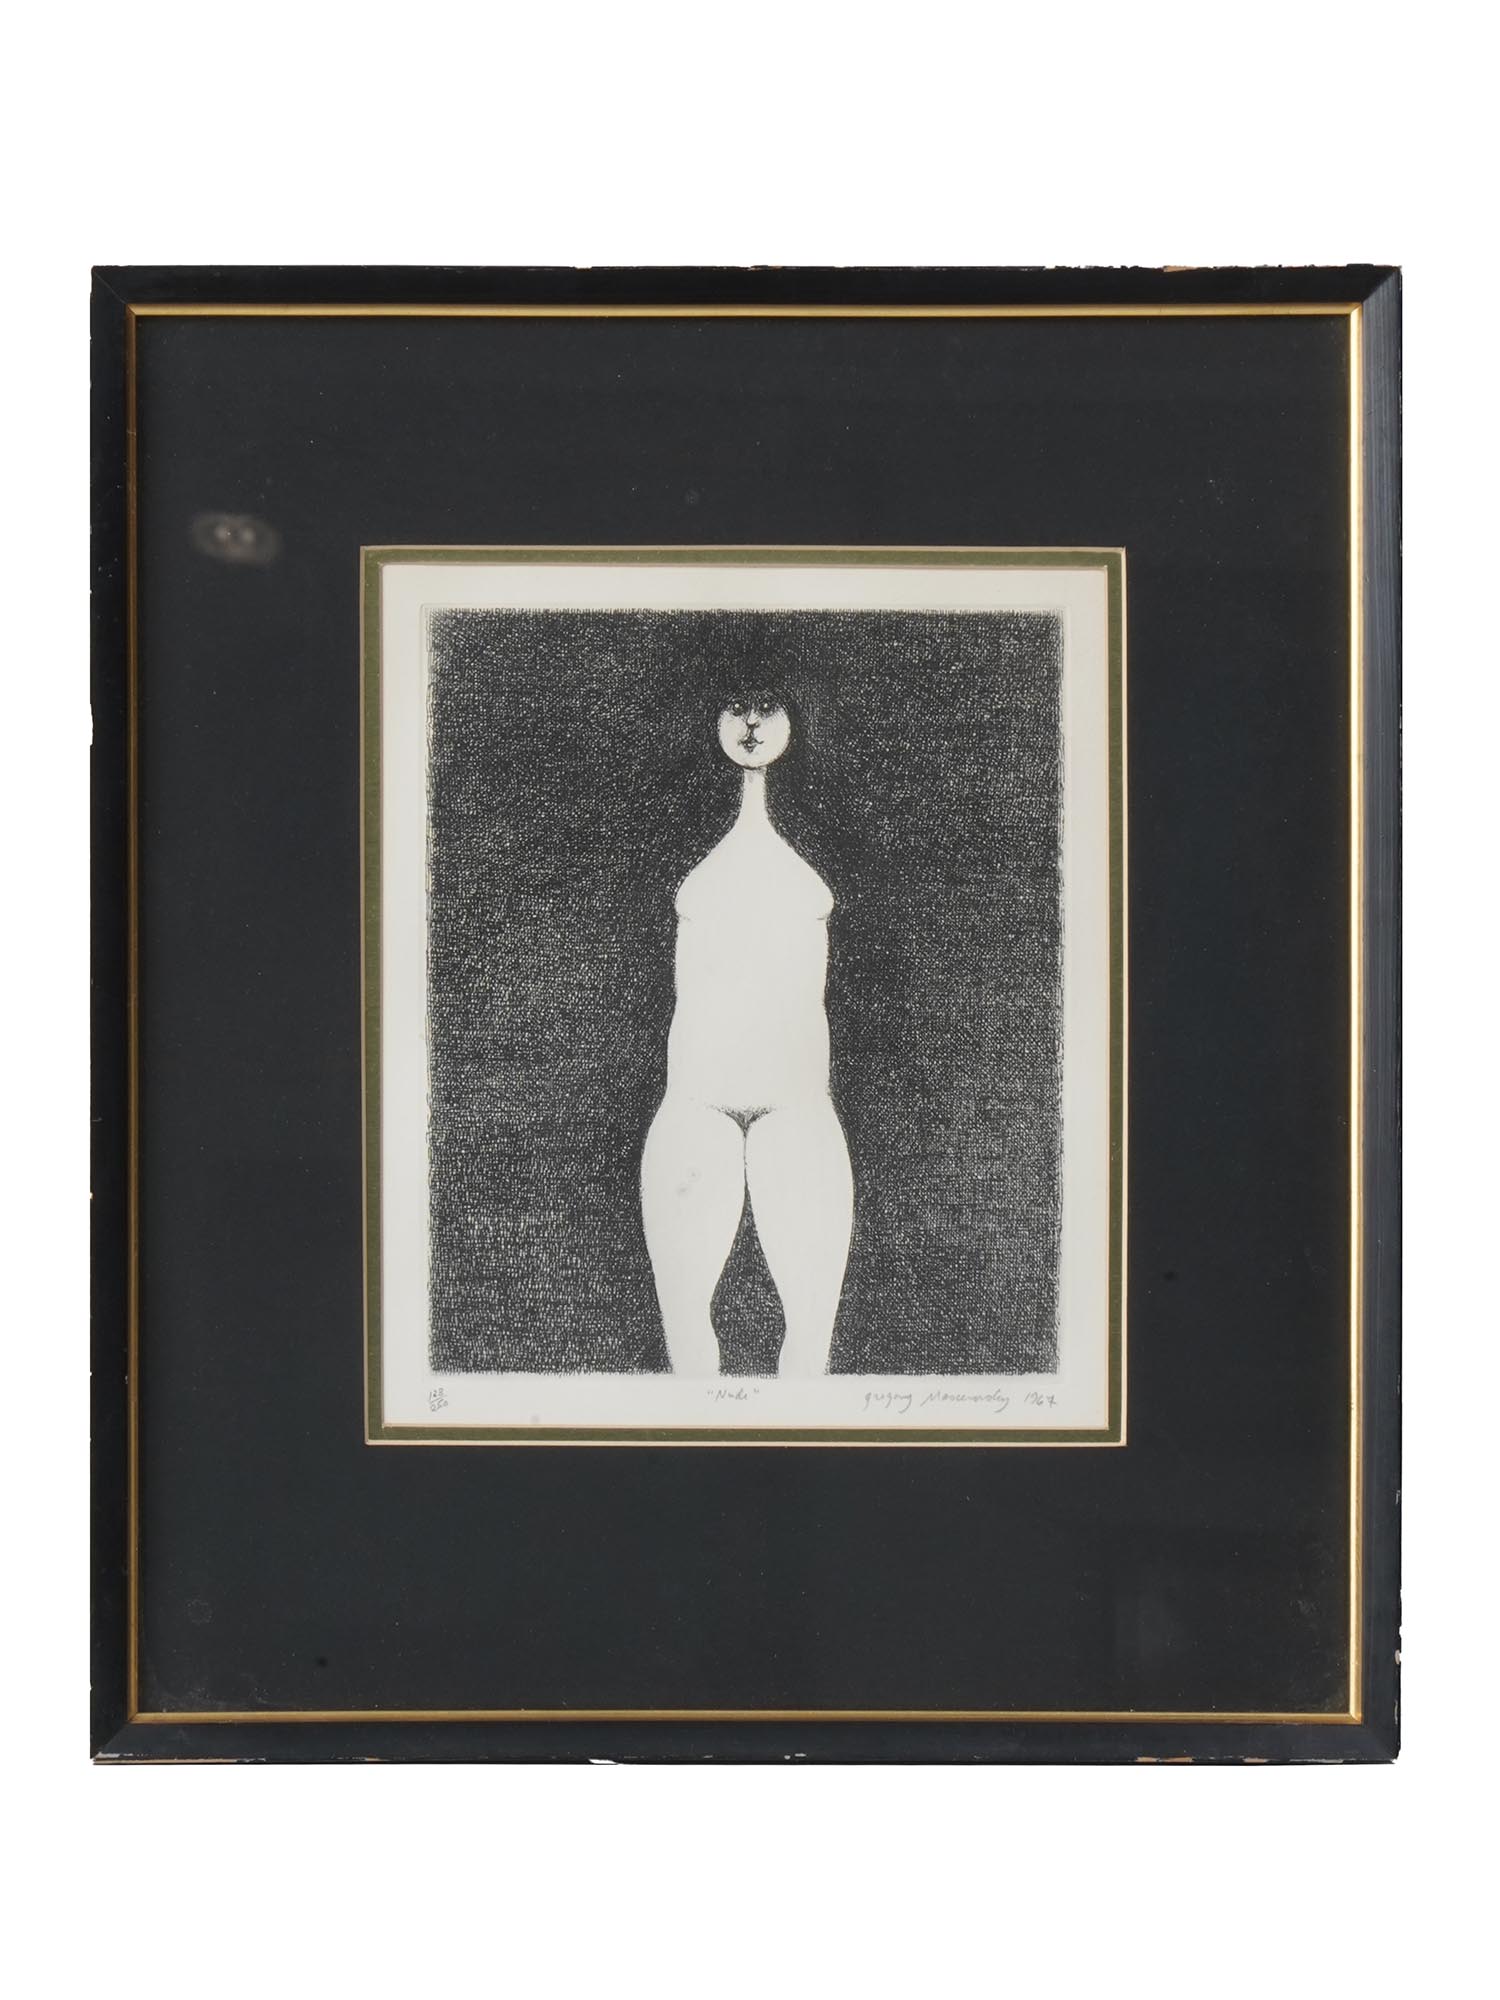 FEMALE NUDE ETCHING 1967 BY GREGORY MASUROVSKY